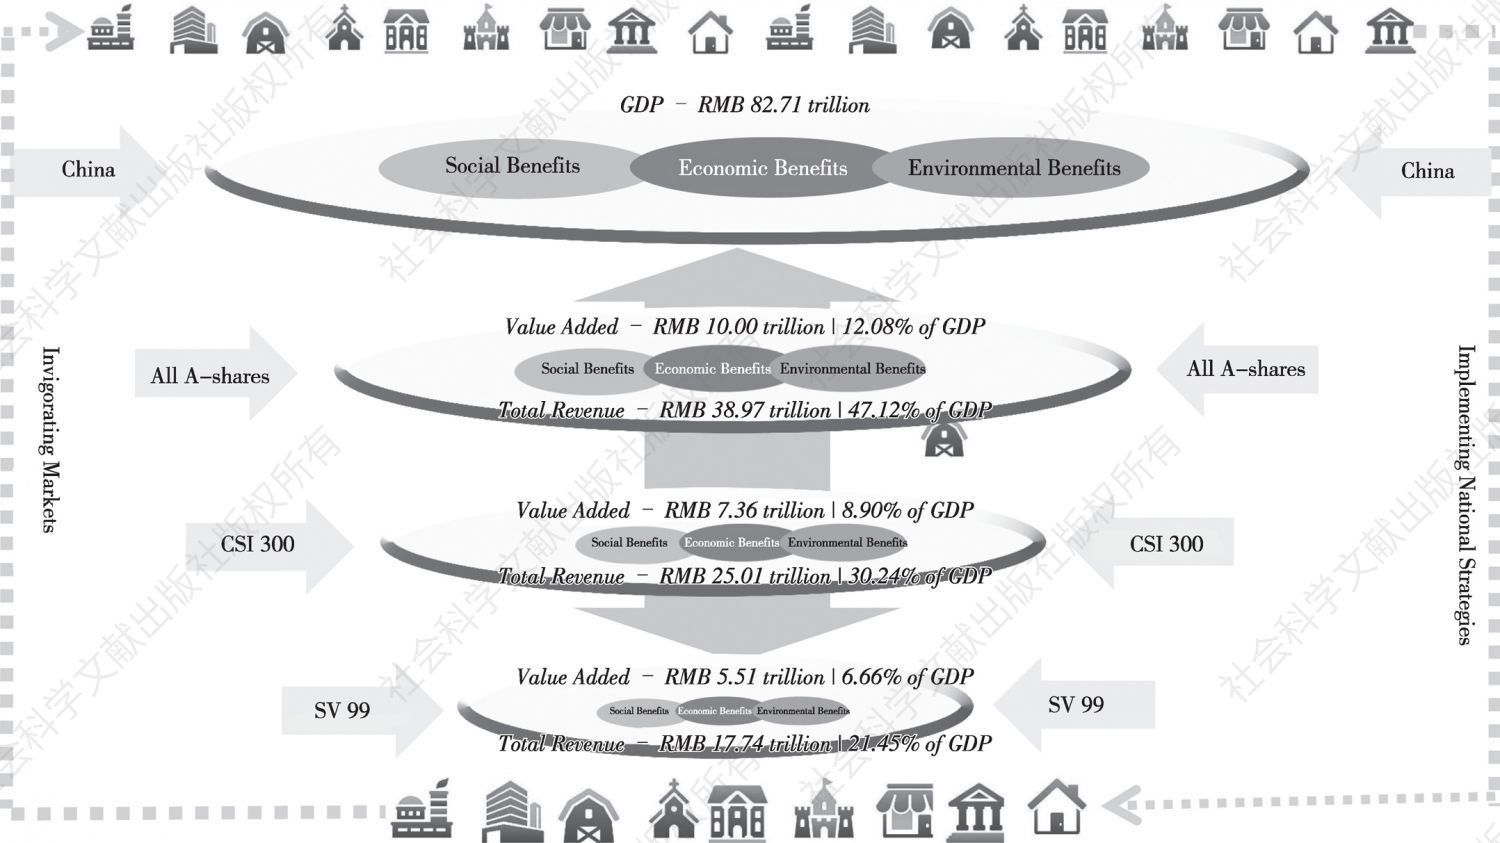 Figure 1.9 China Domestic Economy and SV 99 Listed Companies